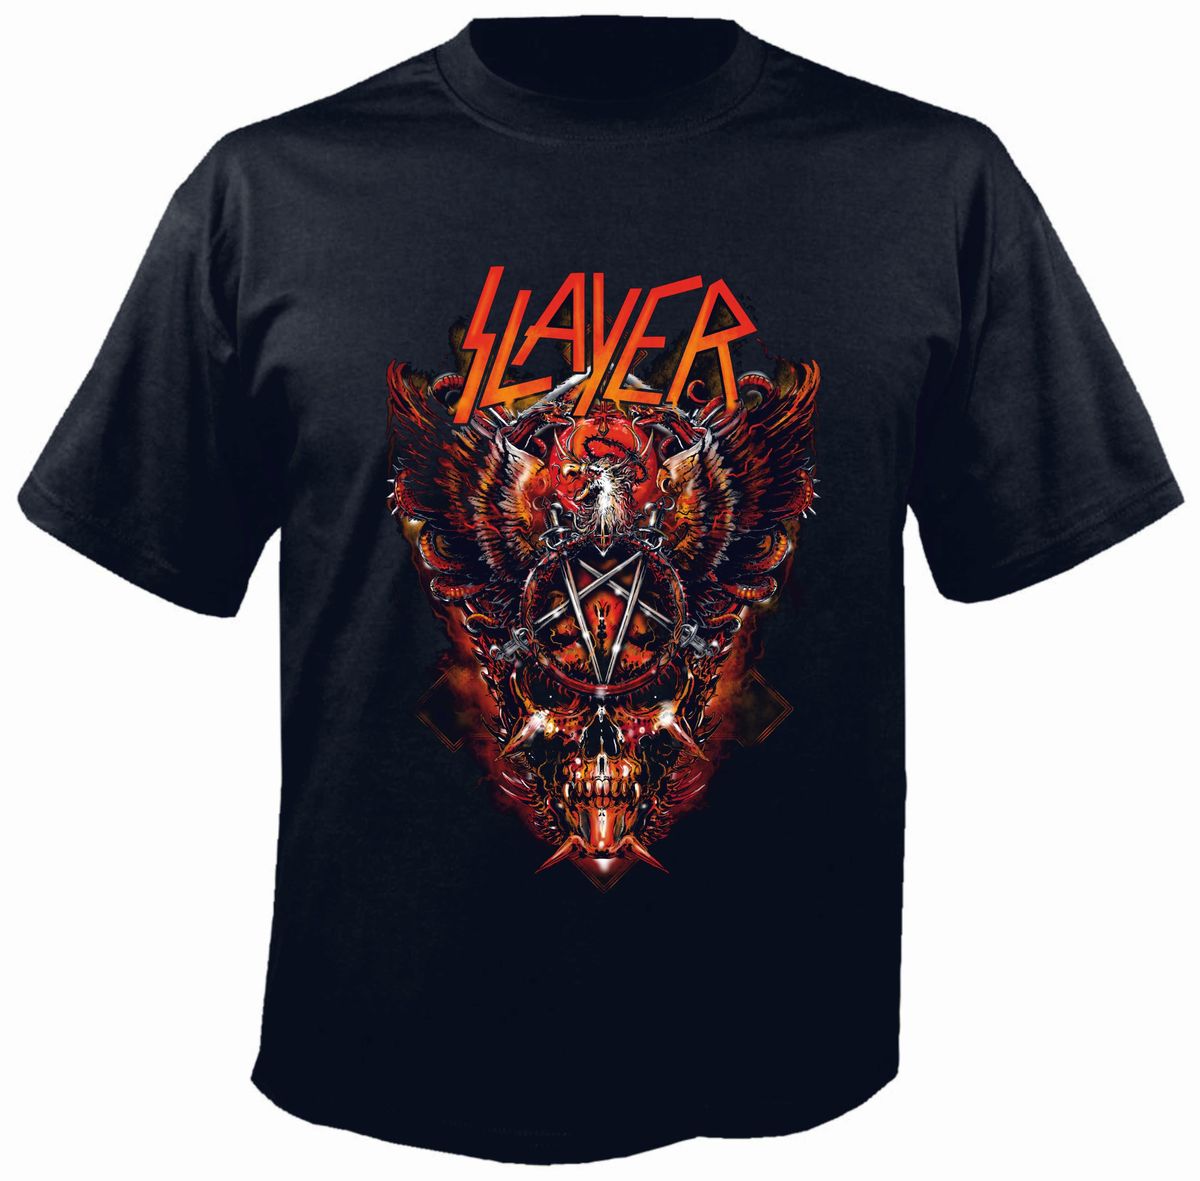 Slayer Band Black T-Shirt – Metal & Rock T-shirts and Accessories